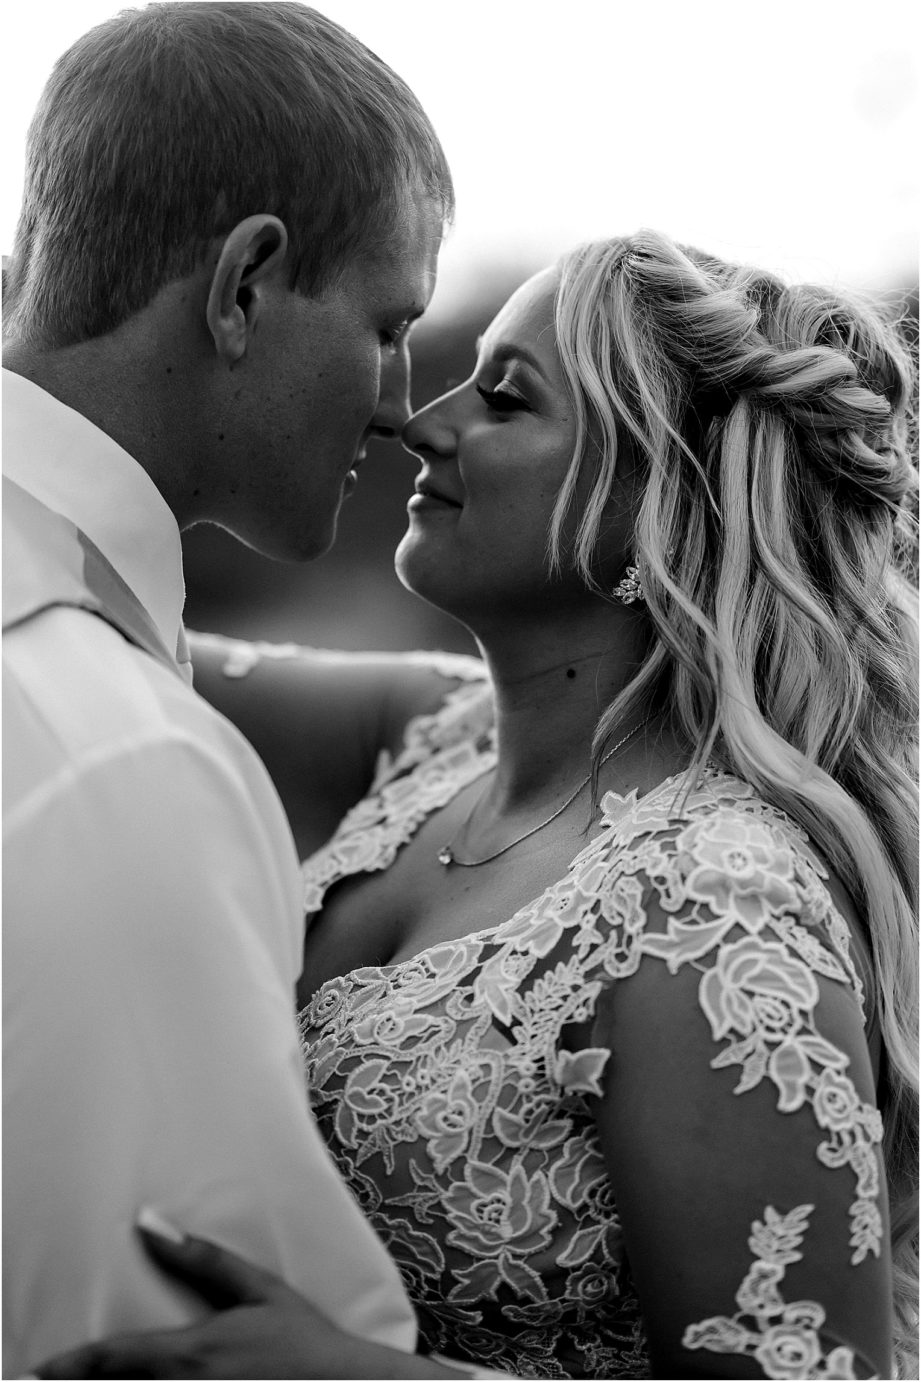 Sweetwater Ranch Wedding Ellensburg Photographer Clay and Hayley sunset portraits